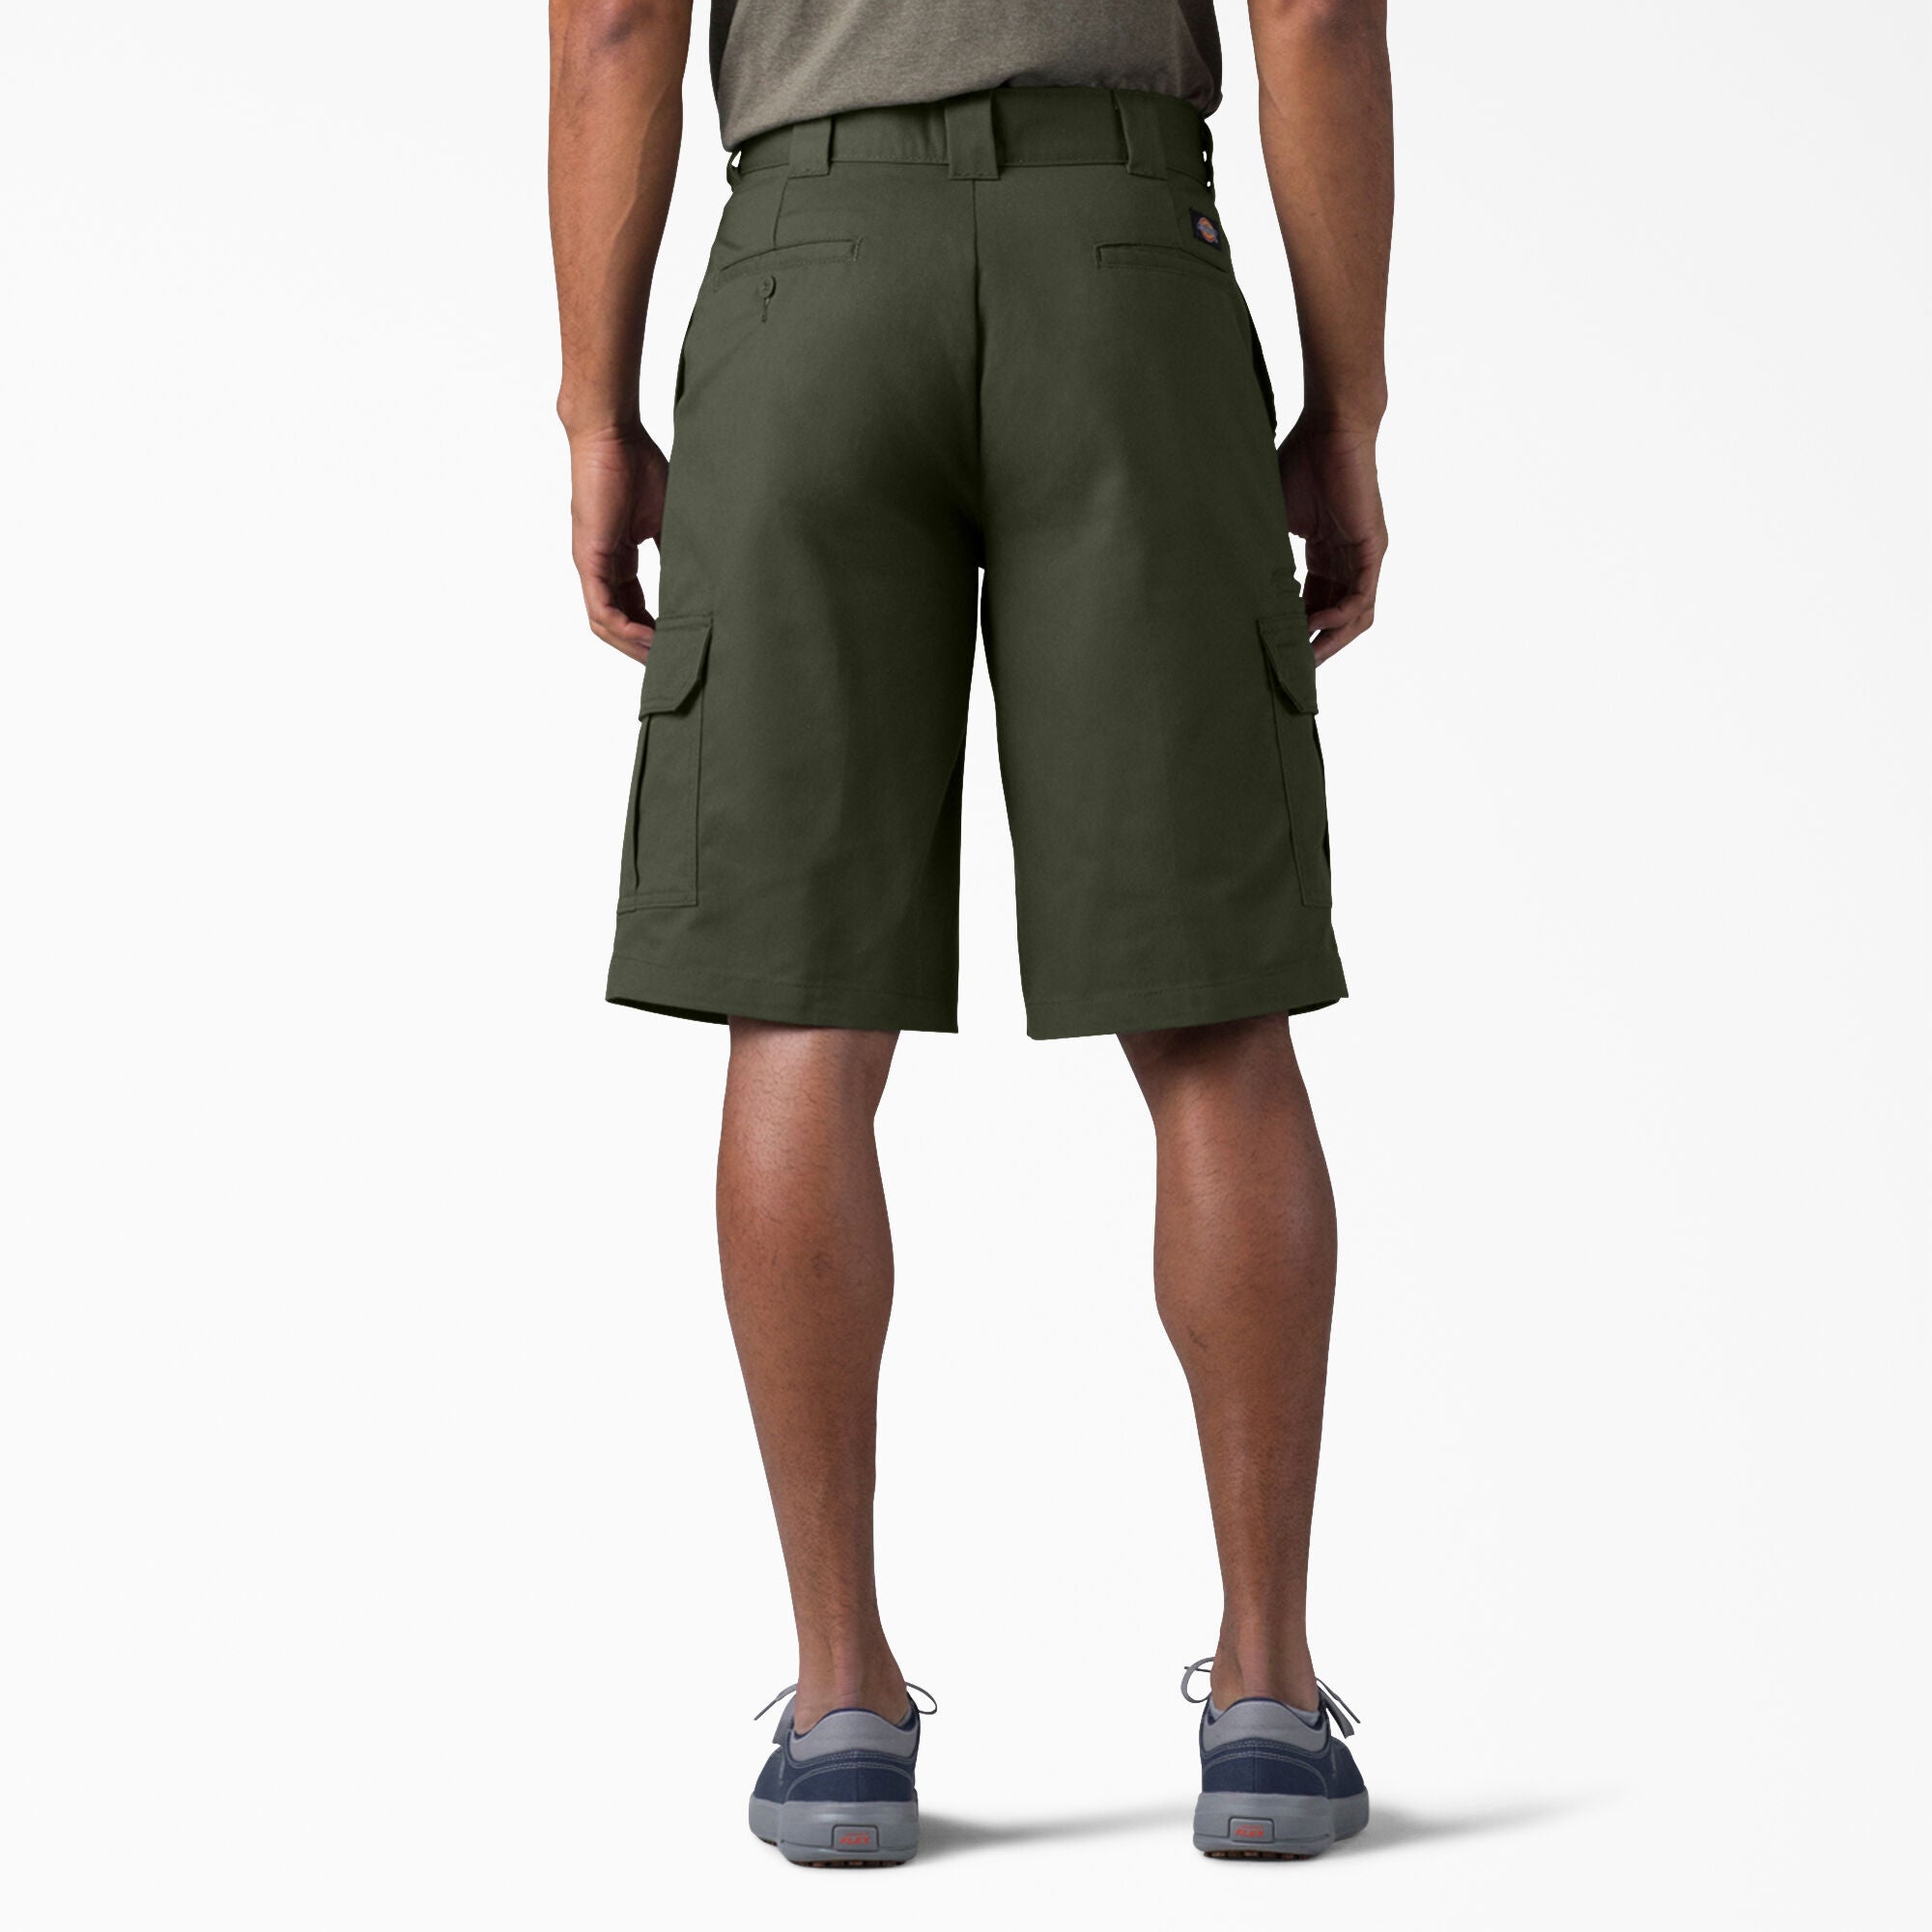 Dickies Relaxed Fit Cargo Shorts, 13, Olive Green - The Blue Ox 916